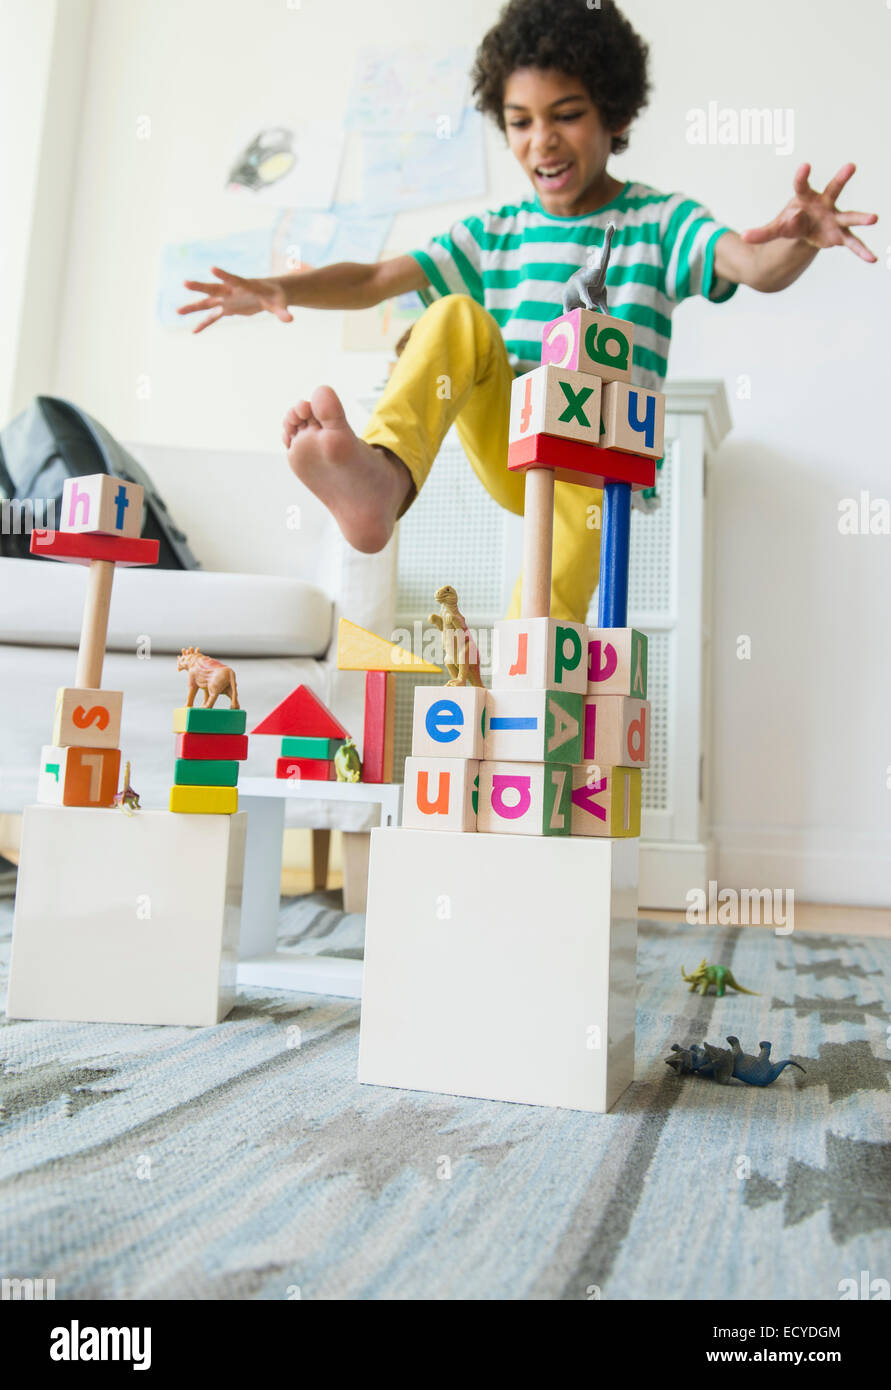 Mixed race boy wrecking wooden block city in living room Stock Photo